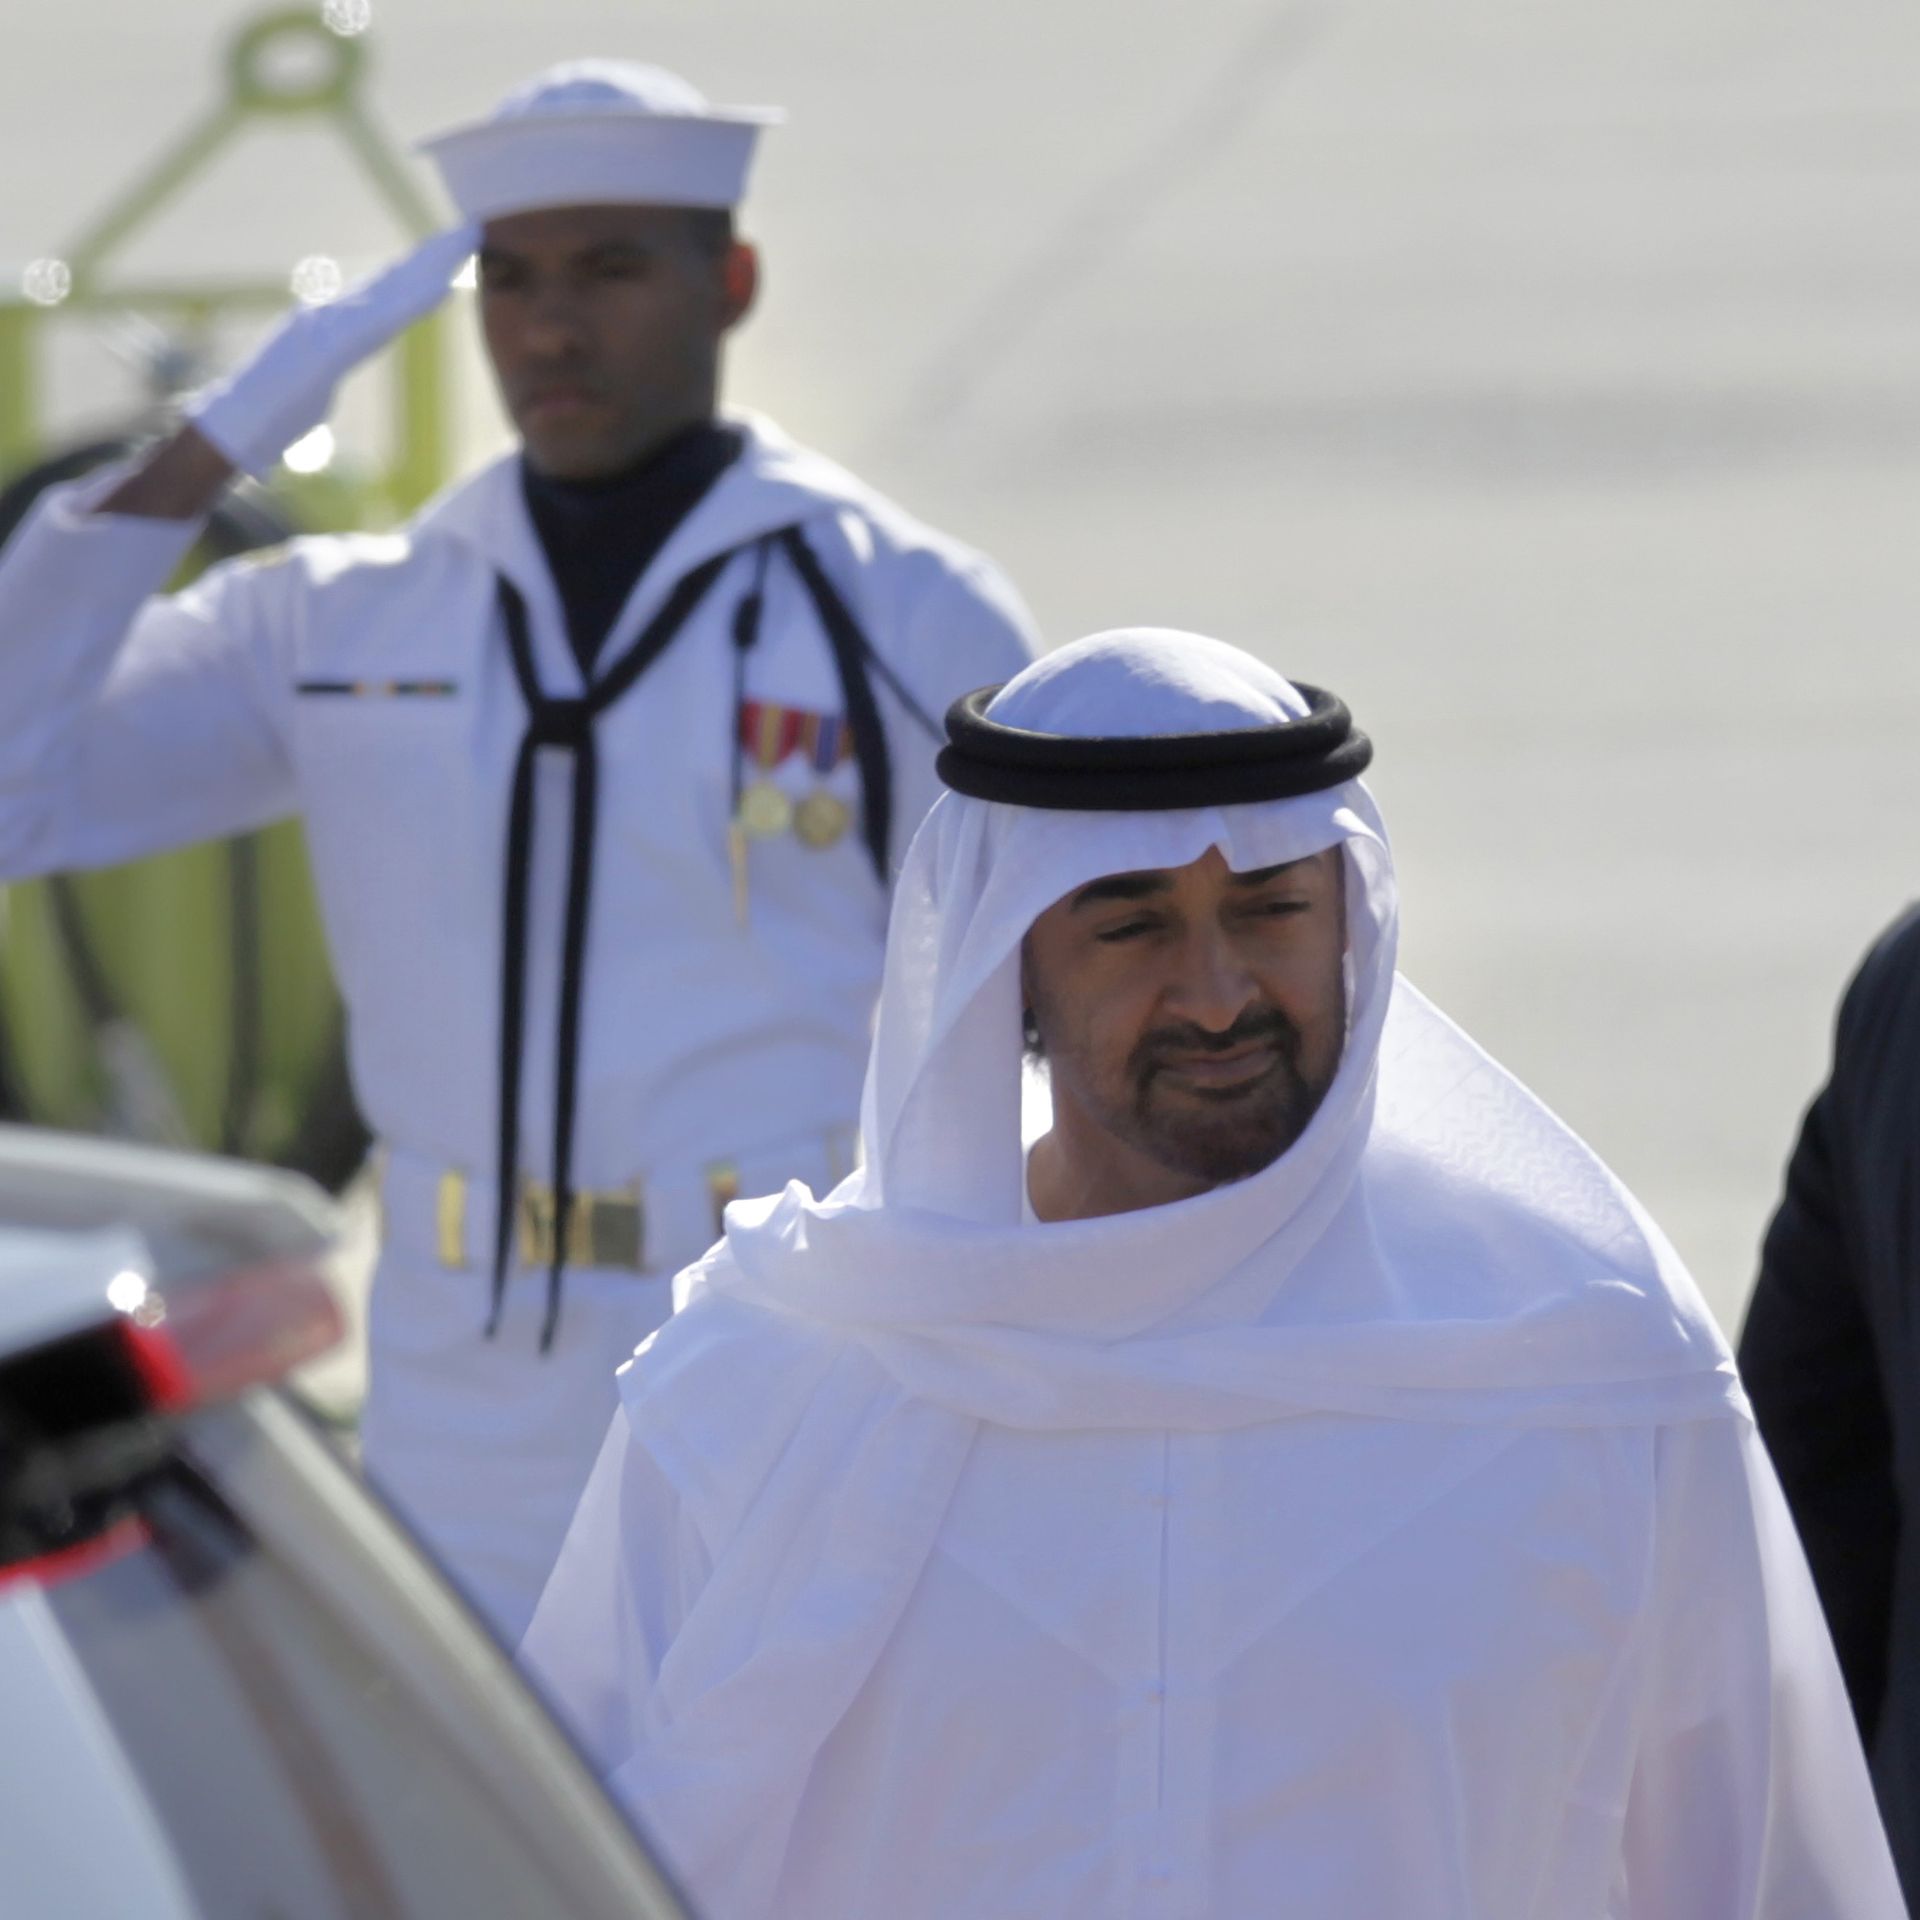 New leader of the UAE